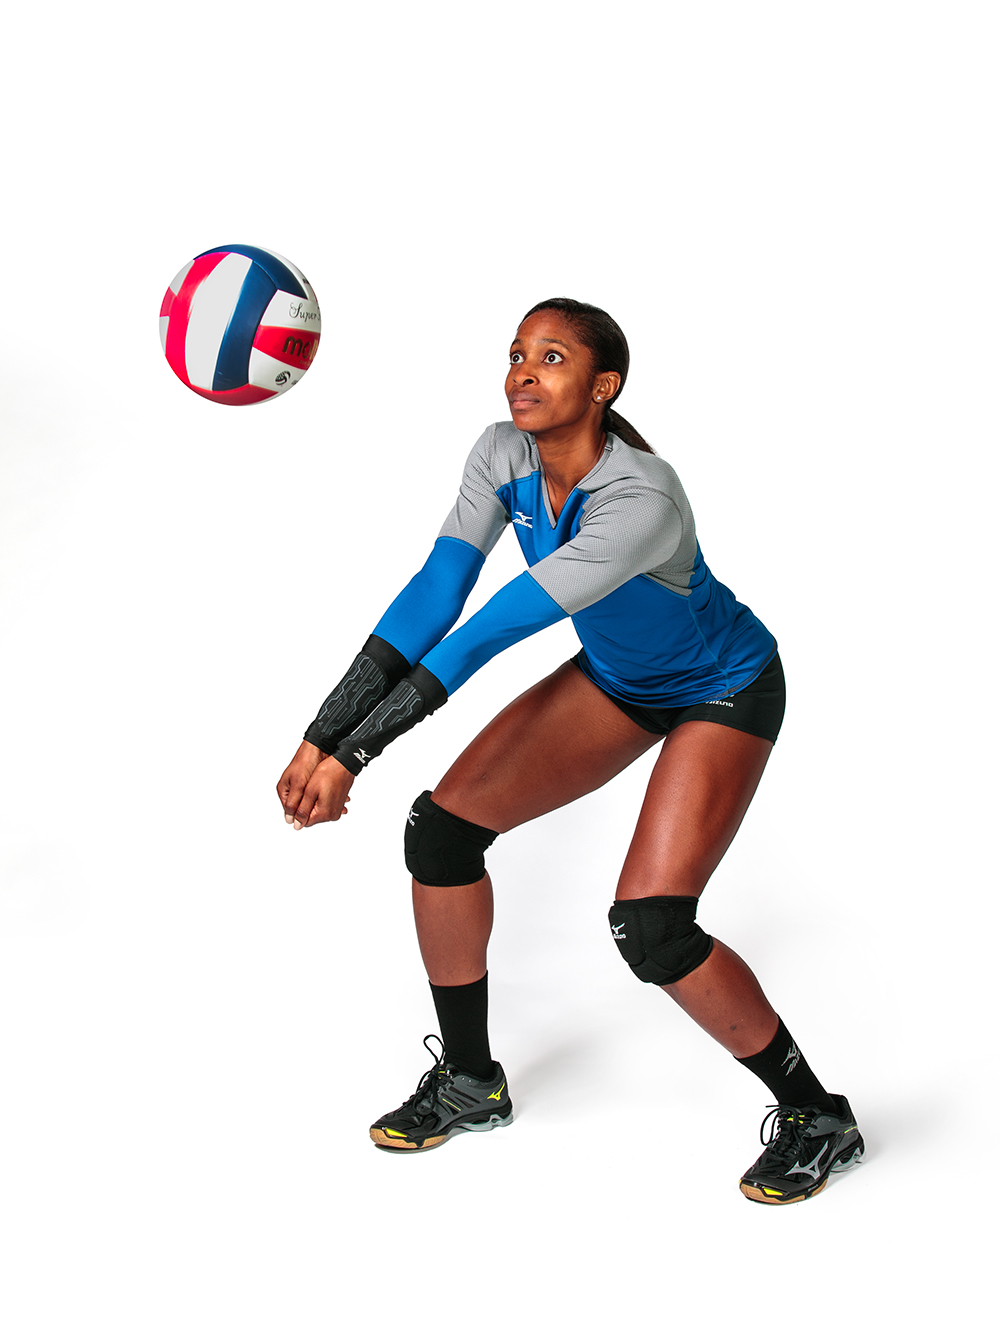 Small/Medium Authorized Retailer of Volleyball Passing Sleeves 